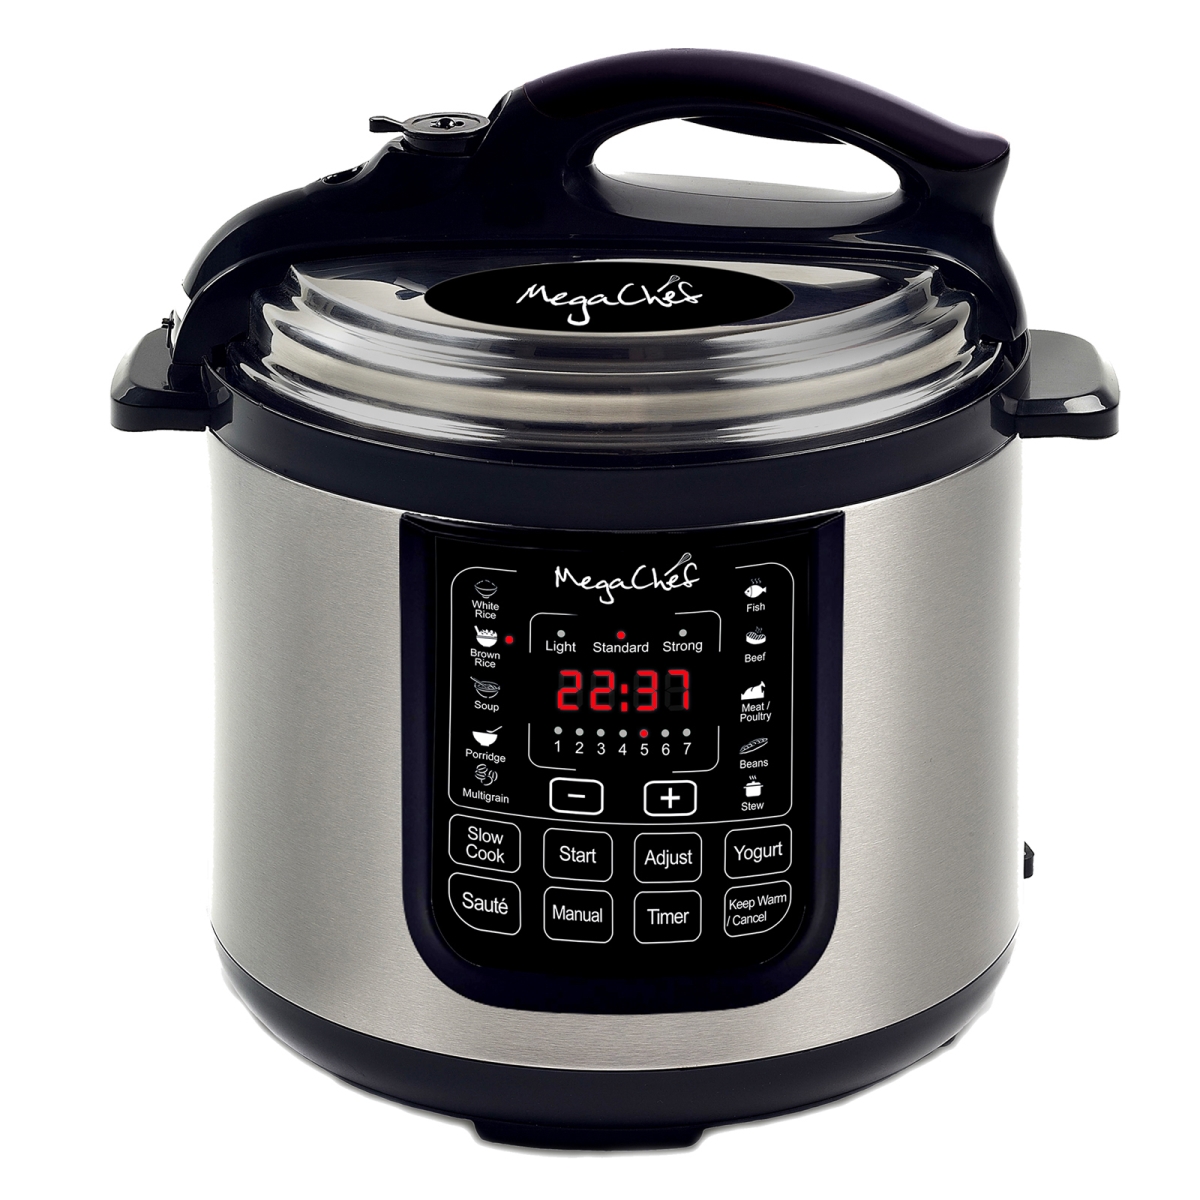 Mcpr120a 8 Qt Digital Pressure Cooker With 13 Pre-set Multi Function Features